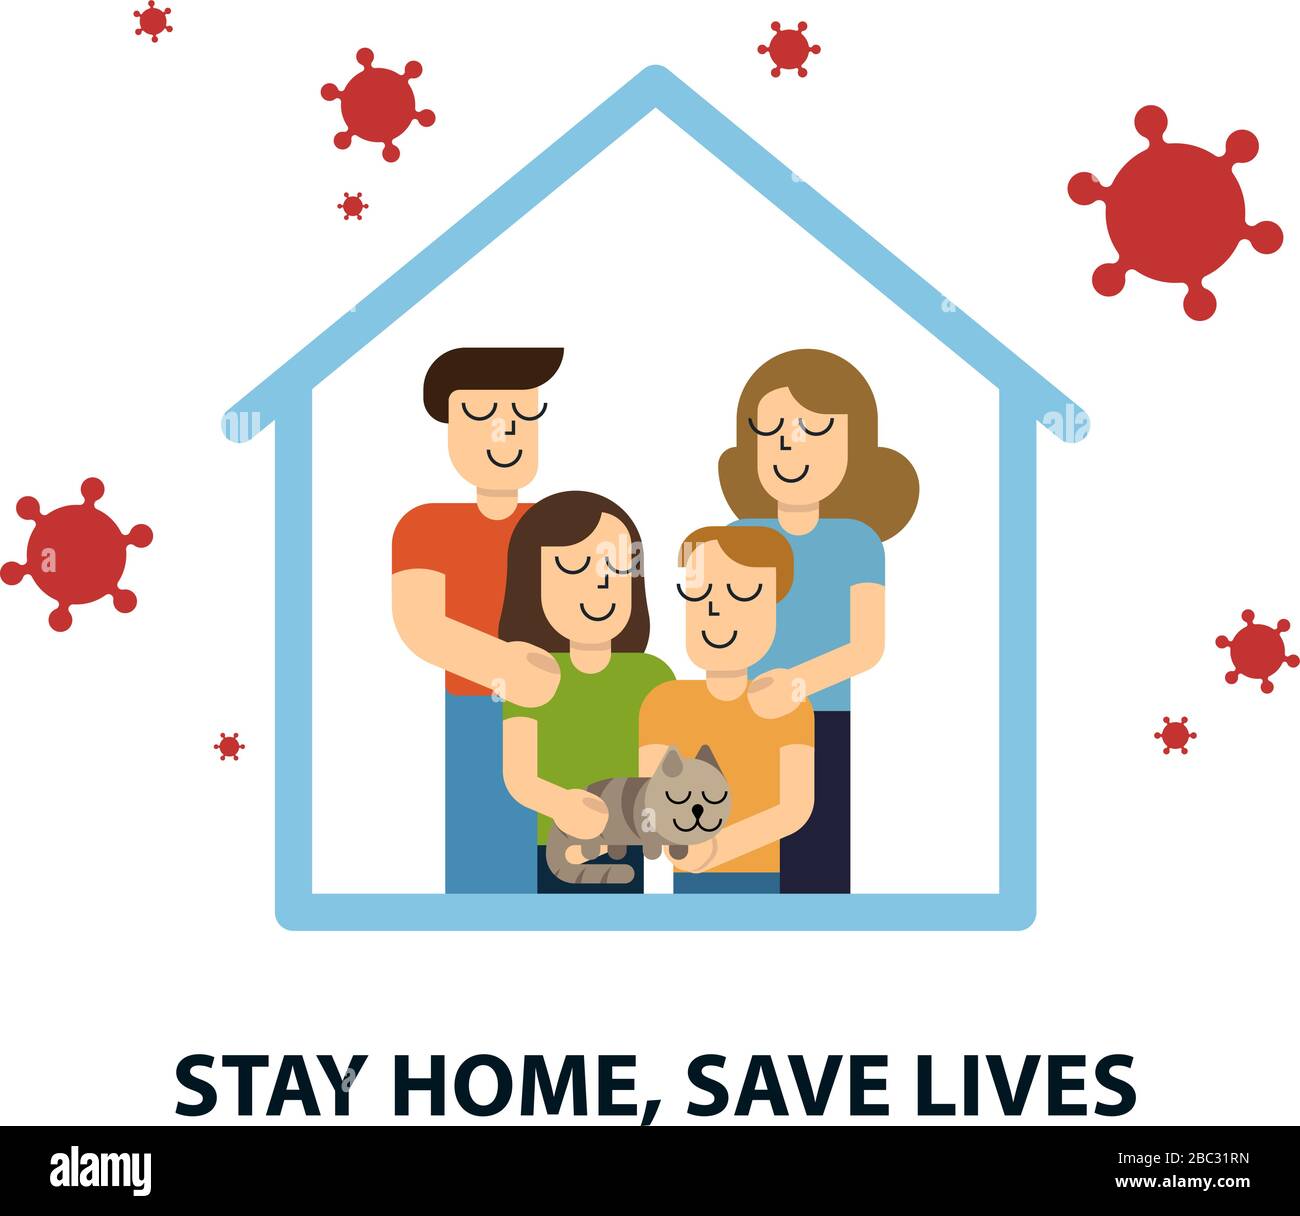 Stay at home awareness social media campaign and coronavirus prevention family smiling and staying together. Vector illustration Stock Vector